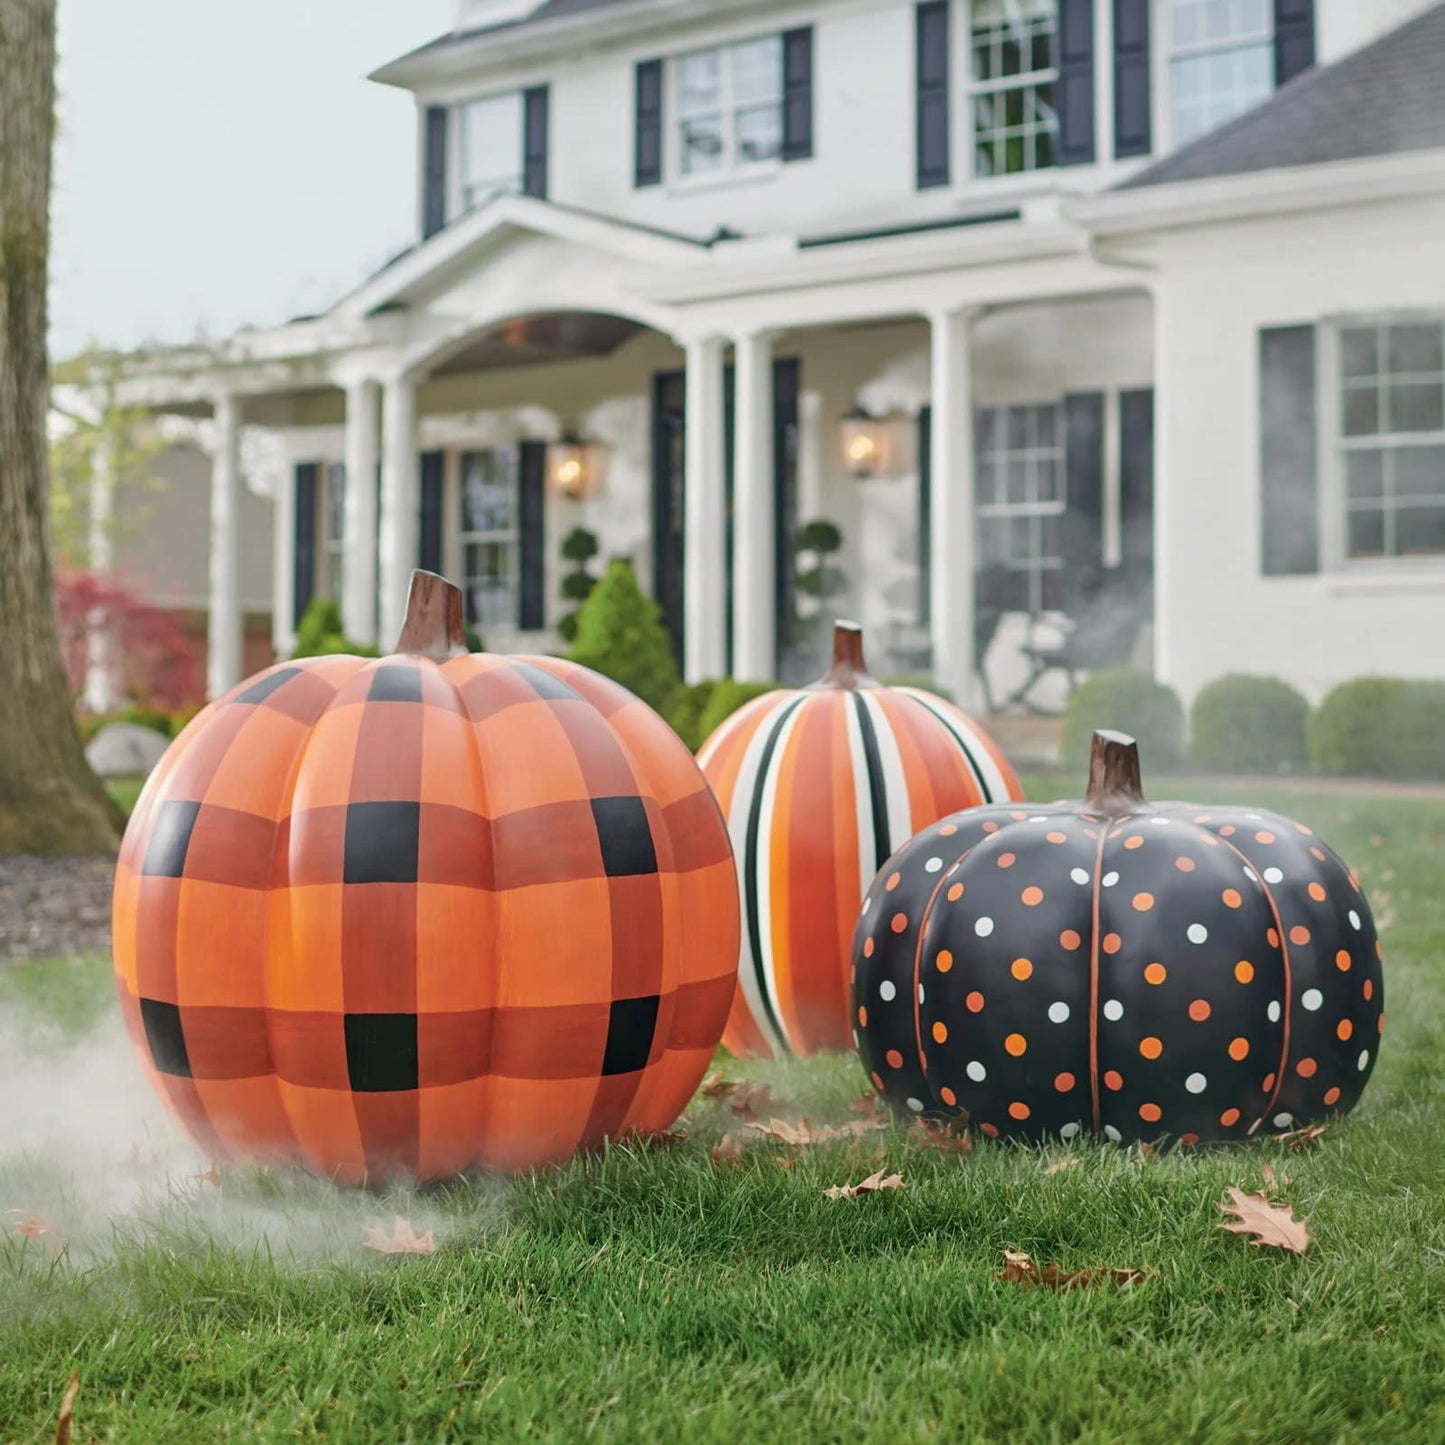 🎃Led Yard Pumpkins Inflatable Decorated🎃